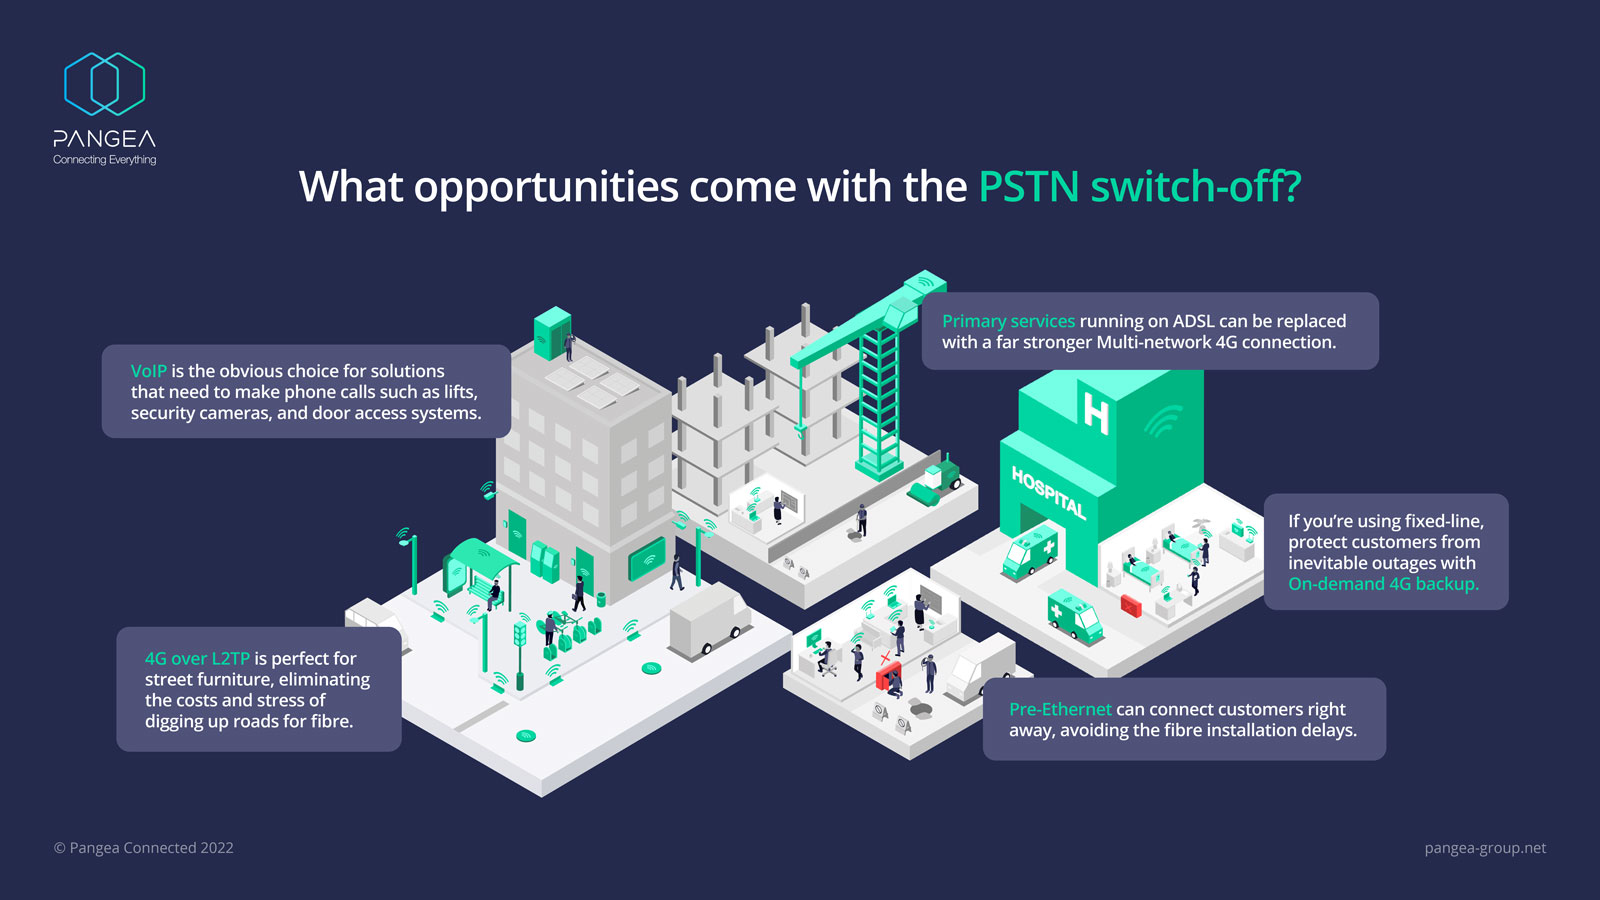 Help your customers migrate their business from PSTN services, and reap the rewards - What opportunities come with the PSTN switch-off